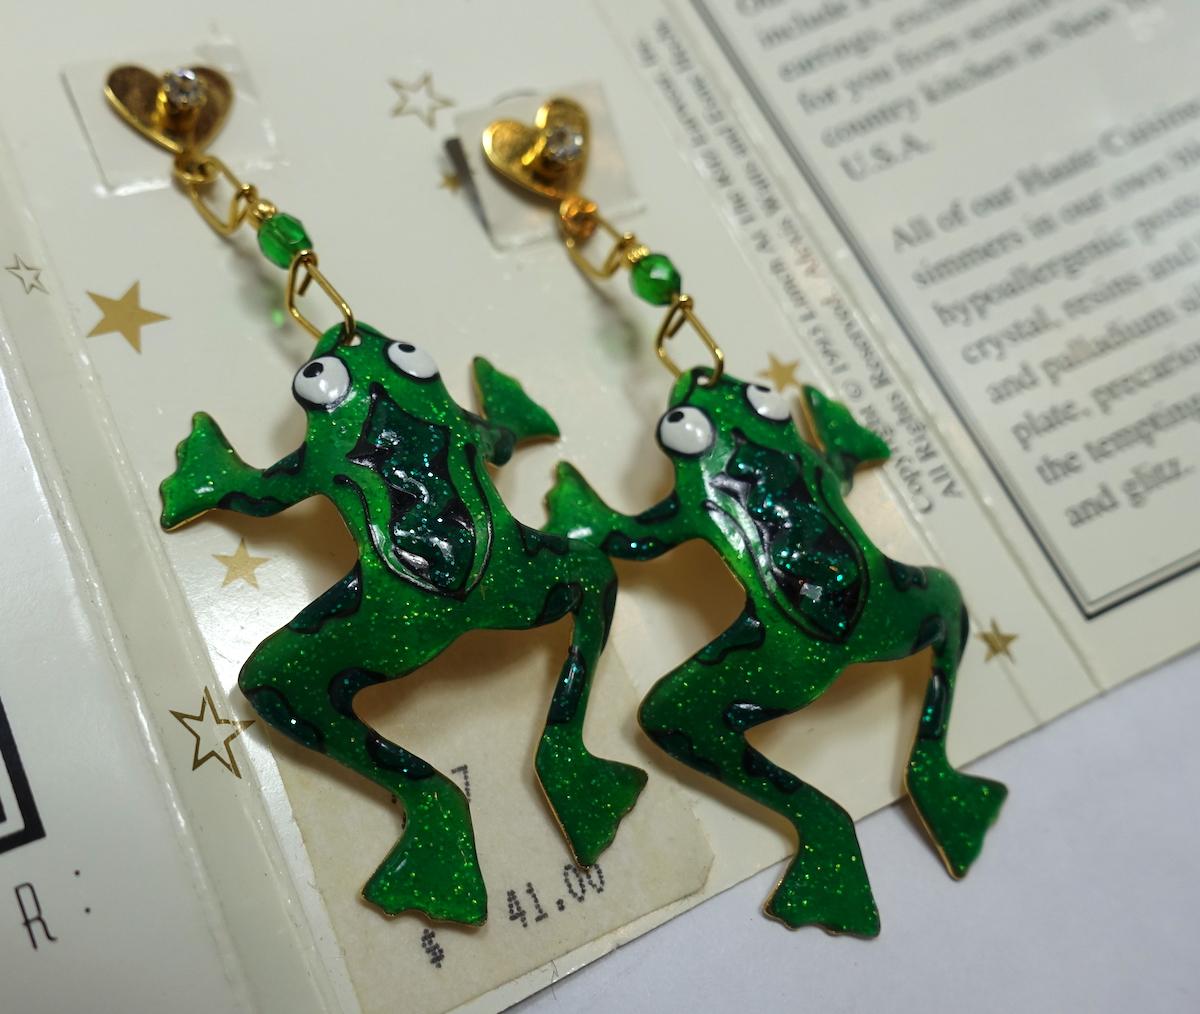 These vintage signed “Lunch at the Ritz” earrings feature a frog design with green, white and black enameling with a heart earpiece and crystal accent on a gold-tone setting.  In excellent condition, these clip earrings measure 3” x 1-1/4”, are